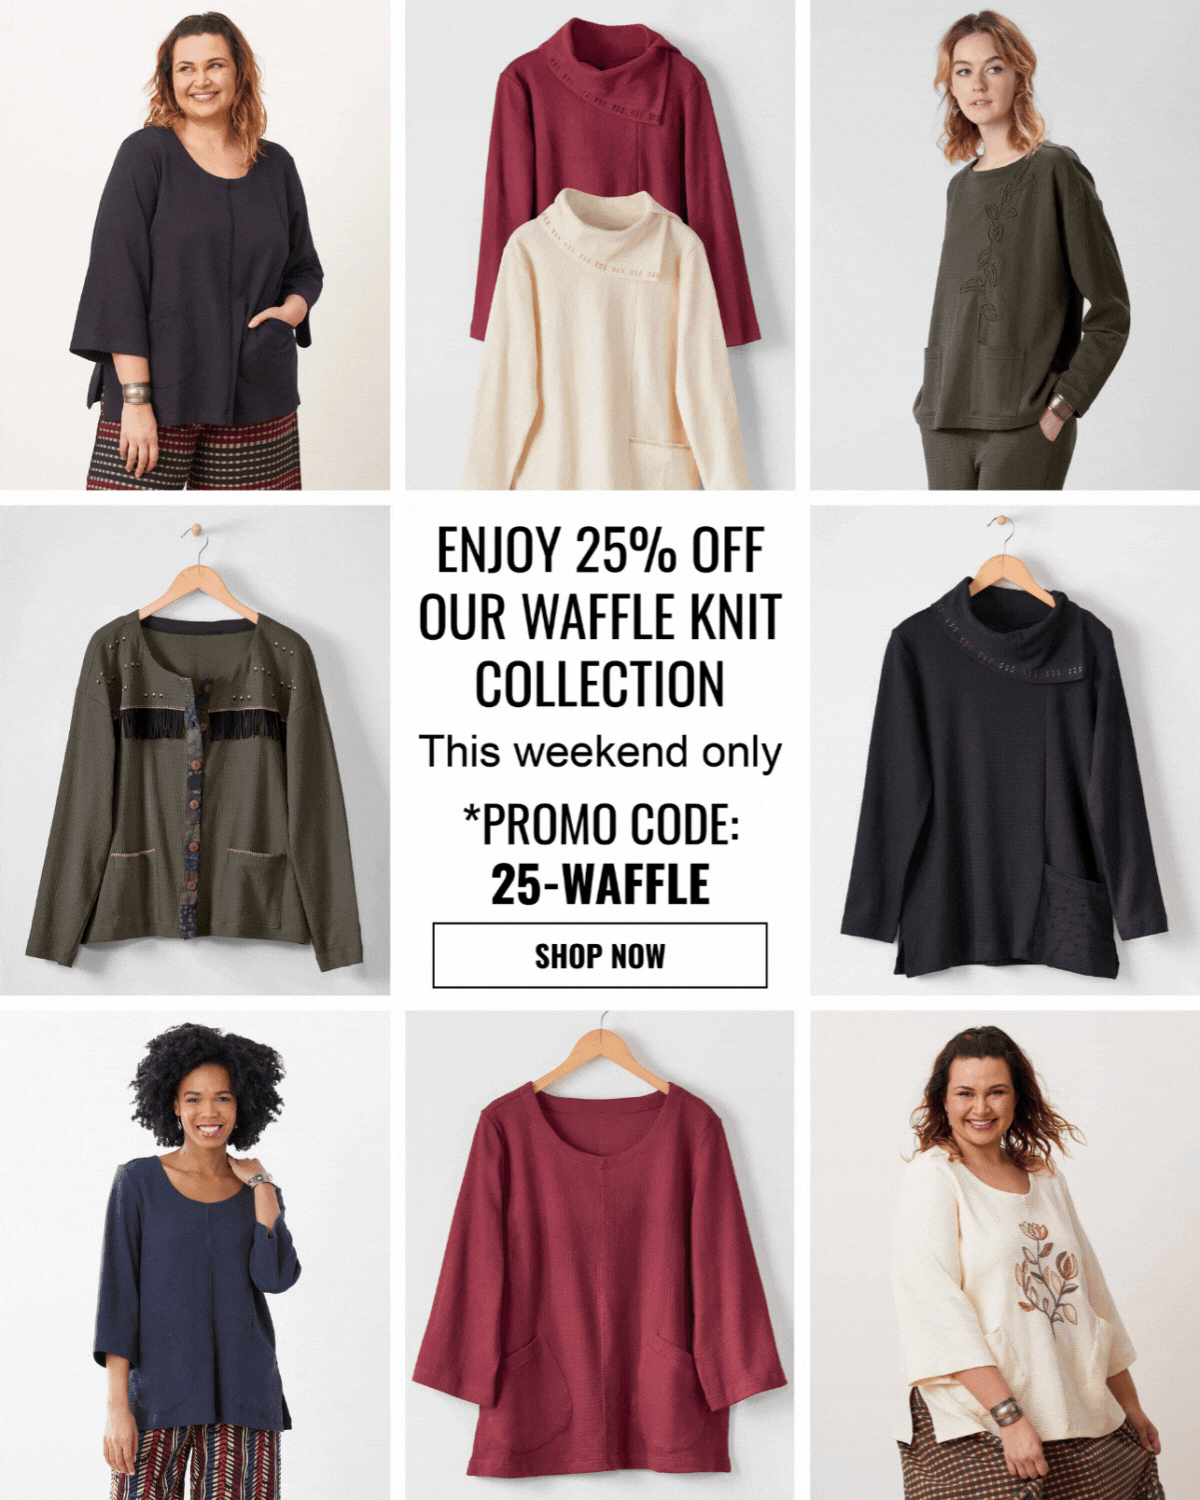 ENJOY 25% OFF OUR WAFFLE KNIT COLLECTION This weekend only *PROMO CODE: 25-WAFFLE SHOP NOW